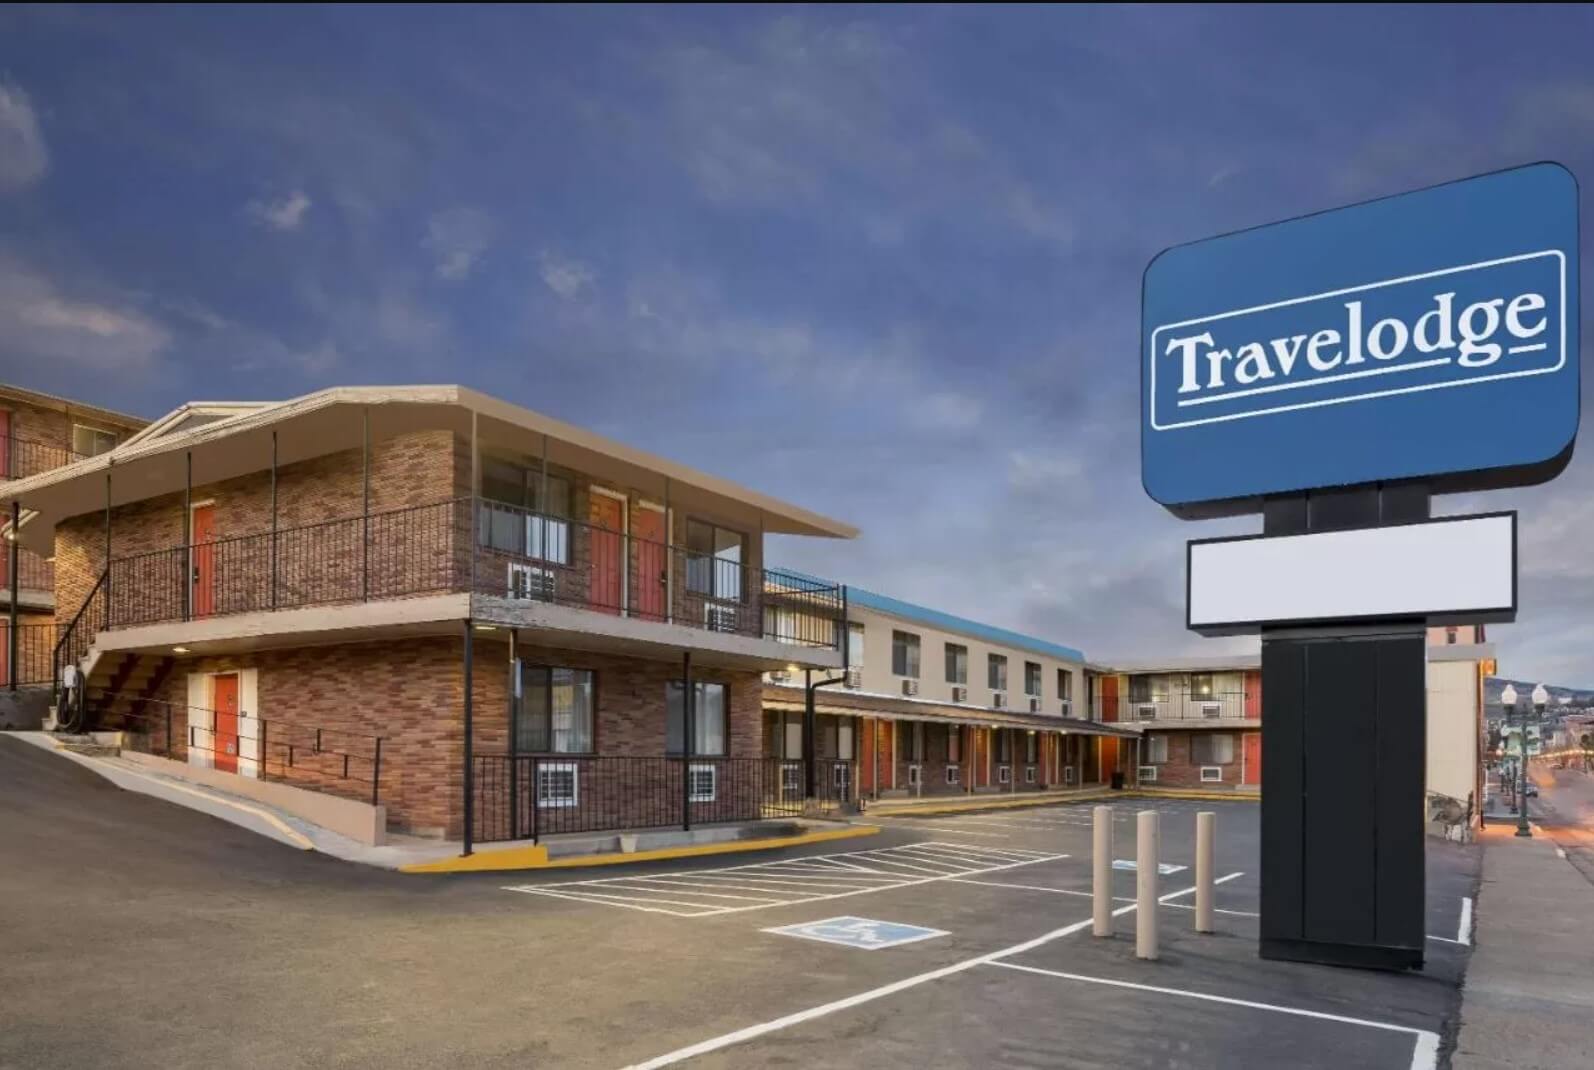 Travelodge - best all-rounder cheap hotel chain